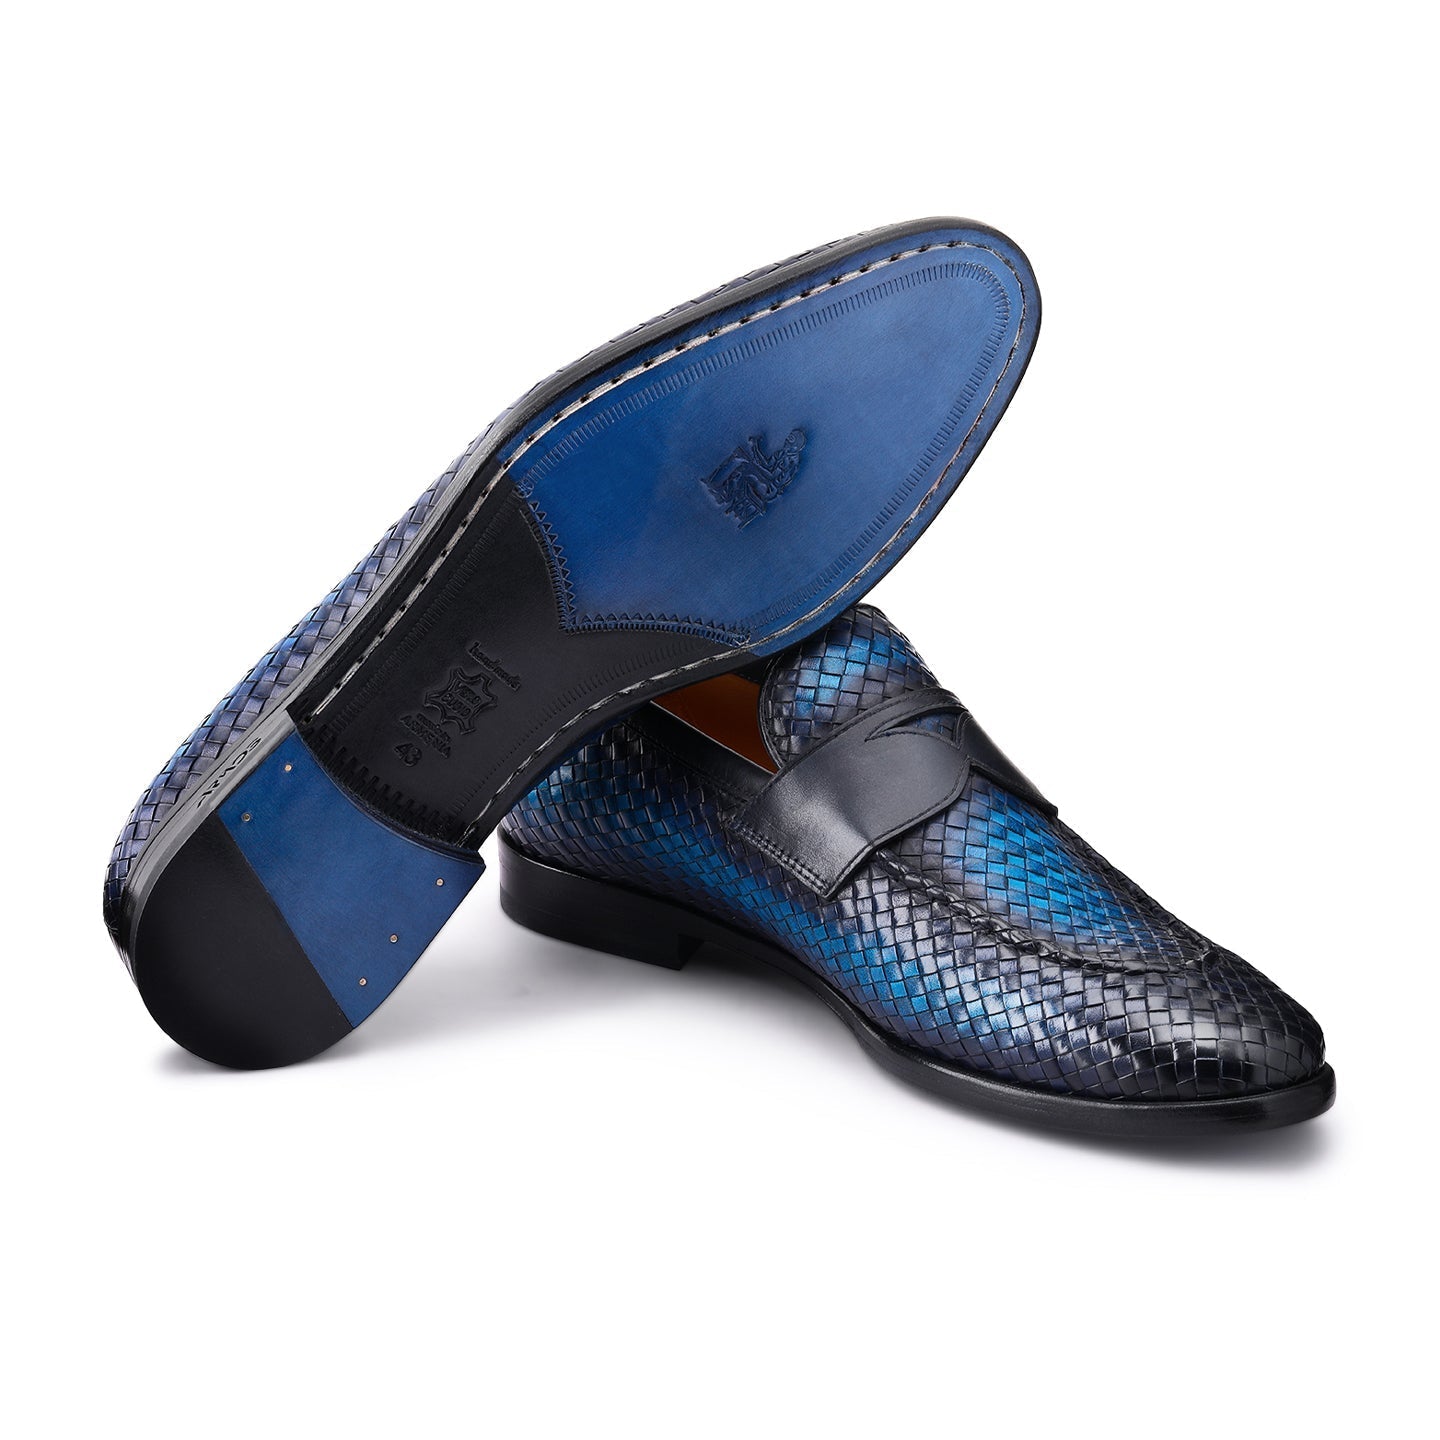 Woven shoes in blue shade